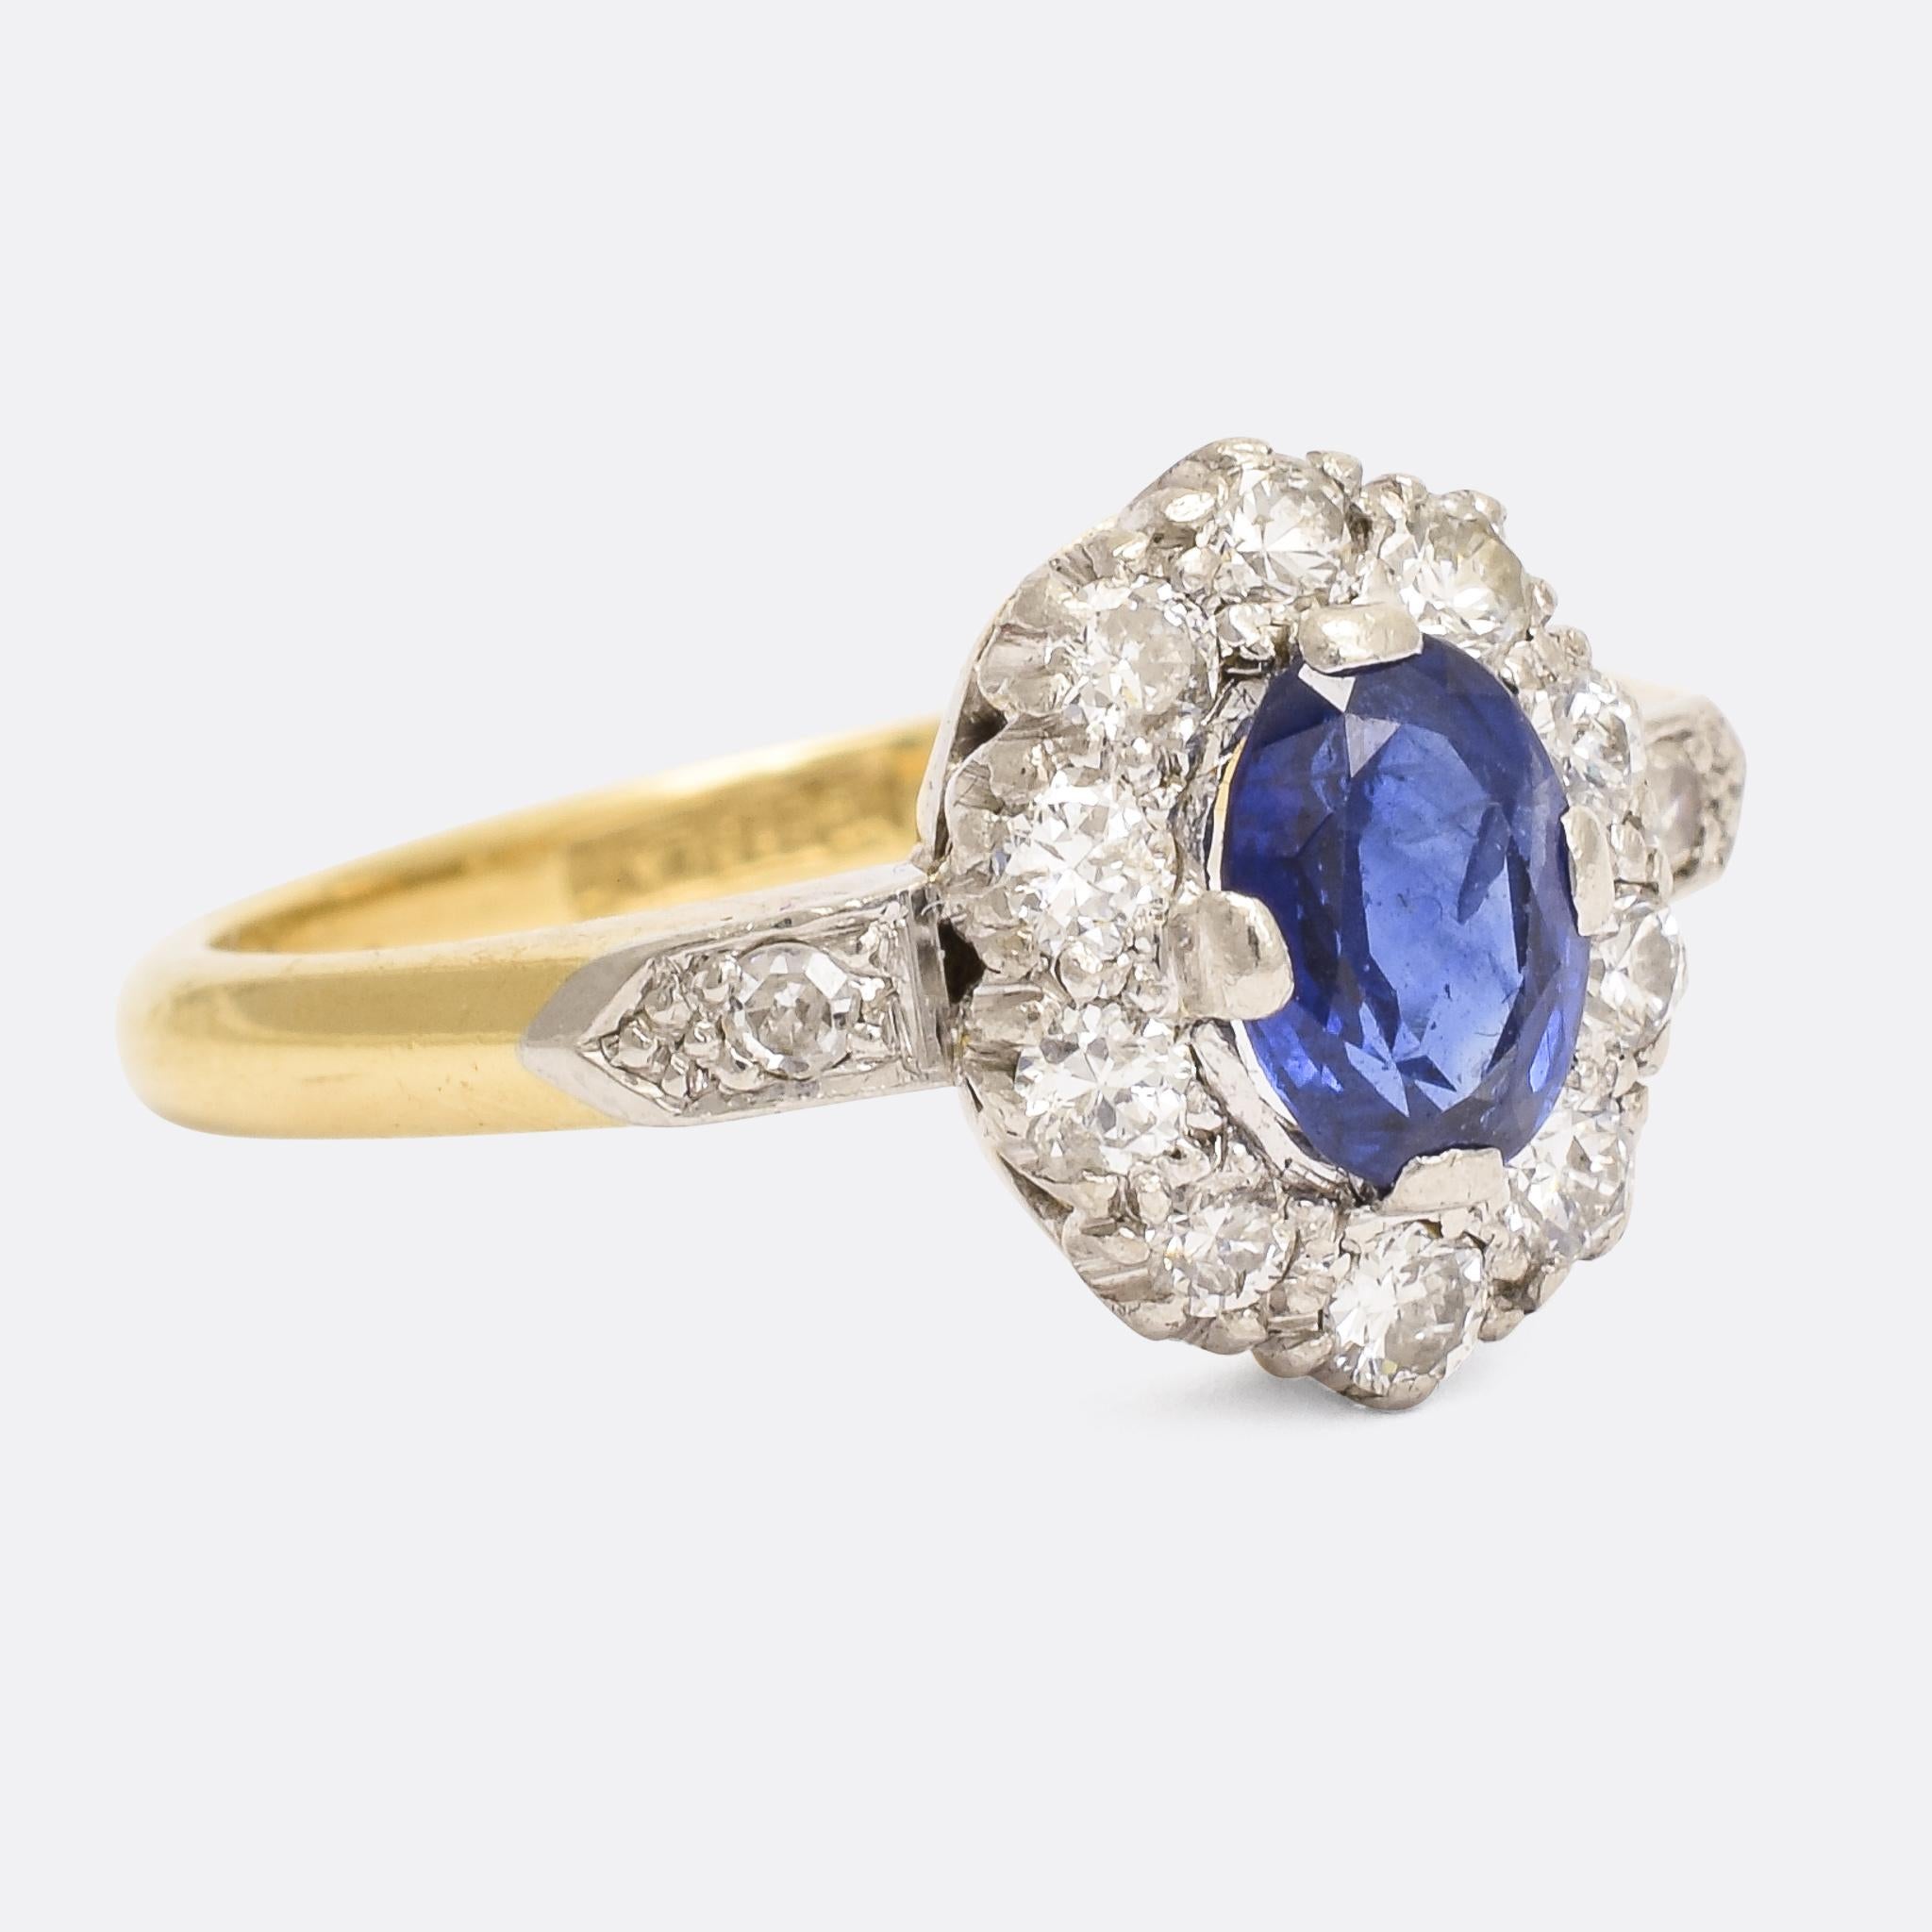 This stunning antique cluster ring dates from the very early 20th Century, circa 1910. It's set with a mouthwatering natural blue sapphire - of exceptional colour - and a halo of brilliant cut diamonds. Modelled in platinum and 18k yellow gold it's